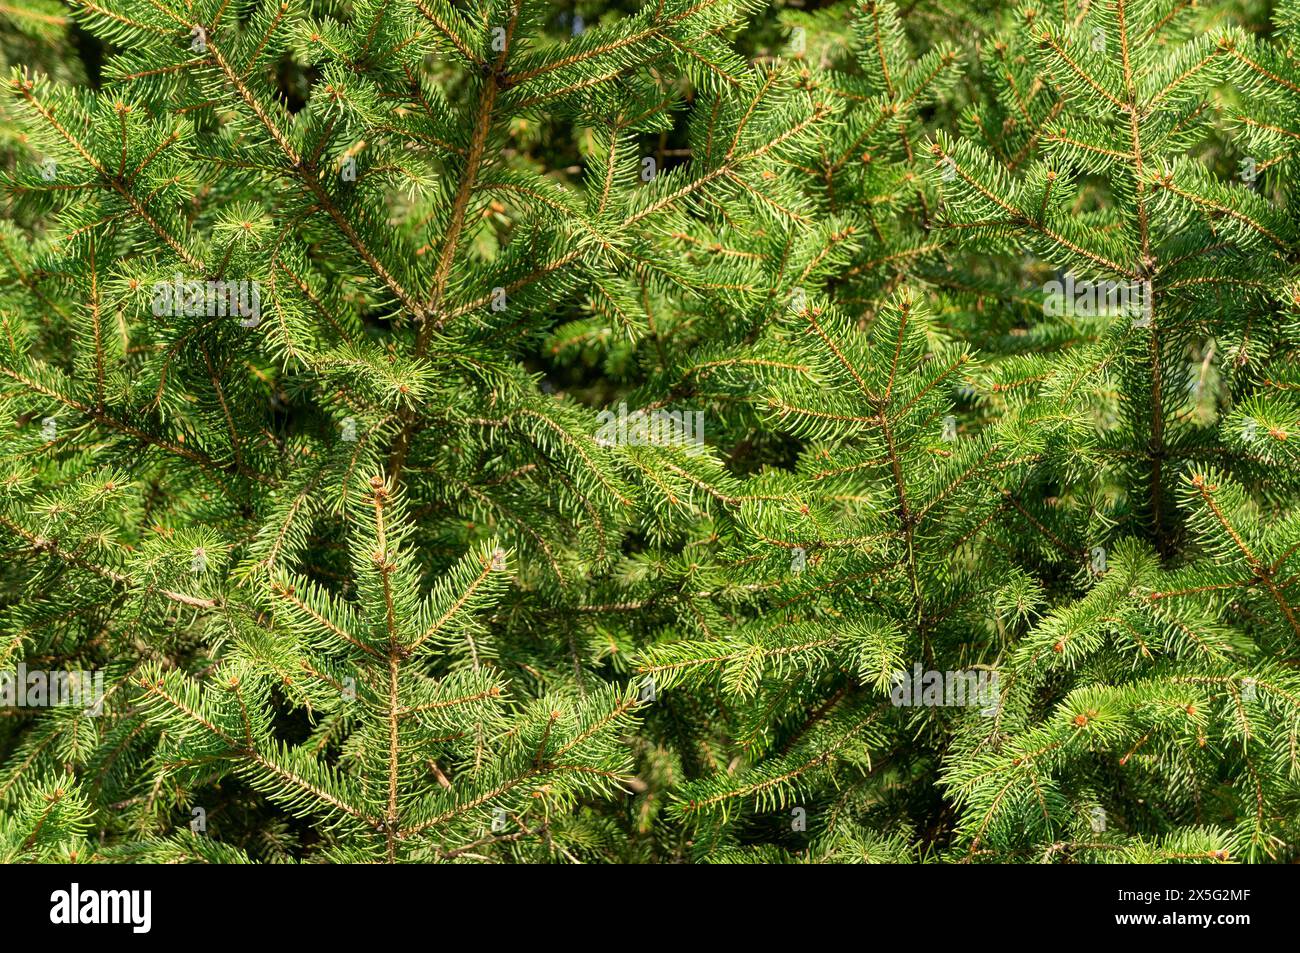 Vibrant green spruce tree branches. Close-up image showcasing dense, vivid green needles of a fir tree, highlighting the natural beauty and texture. Stock Photo